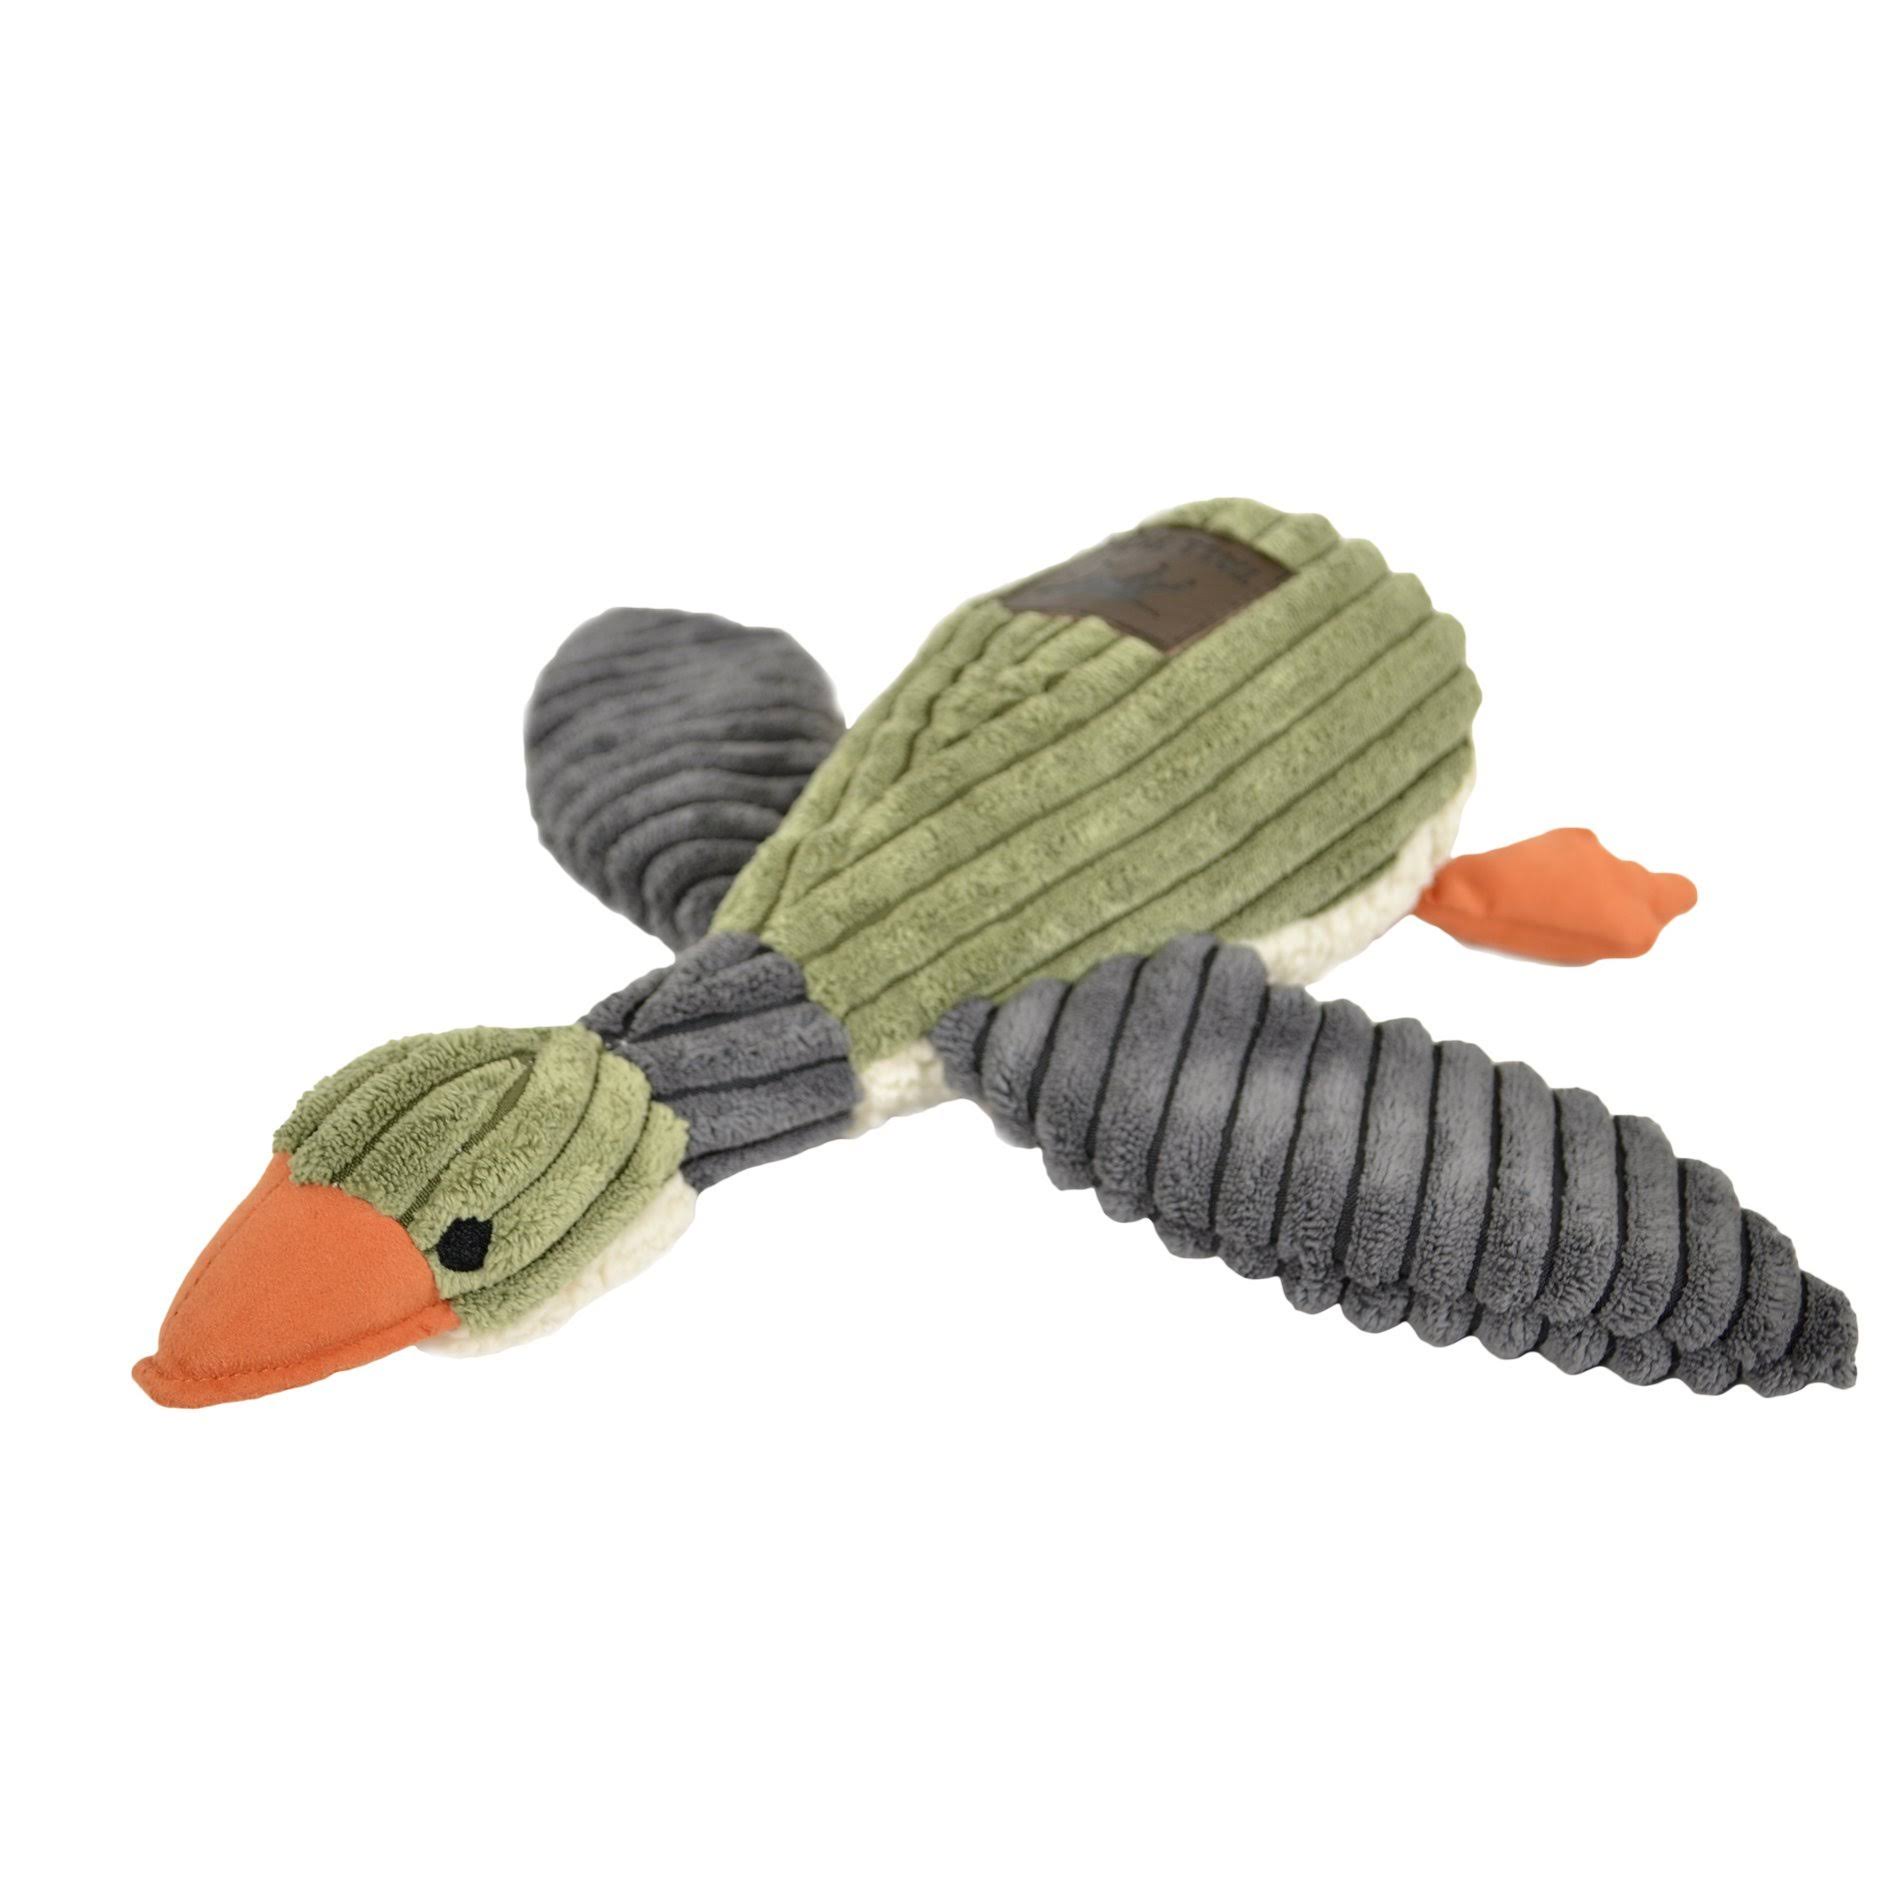 Tall Tails Duck with Squeaker - Sage/Charcoal, 12"